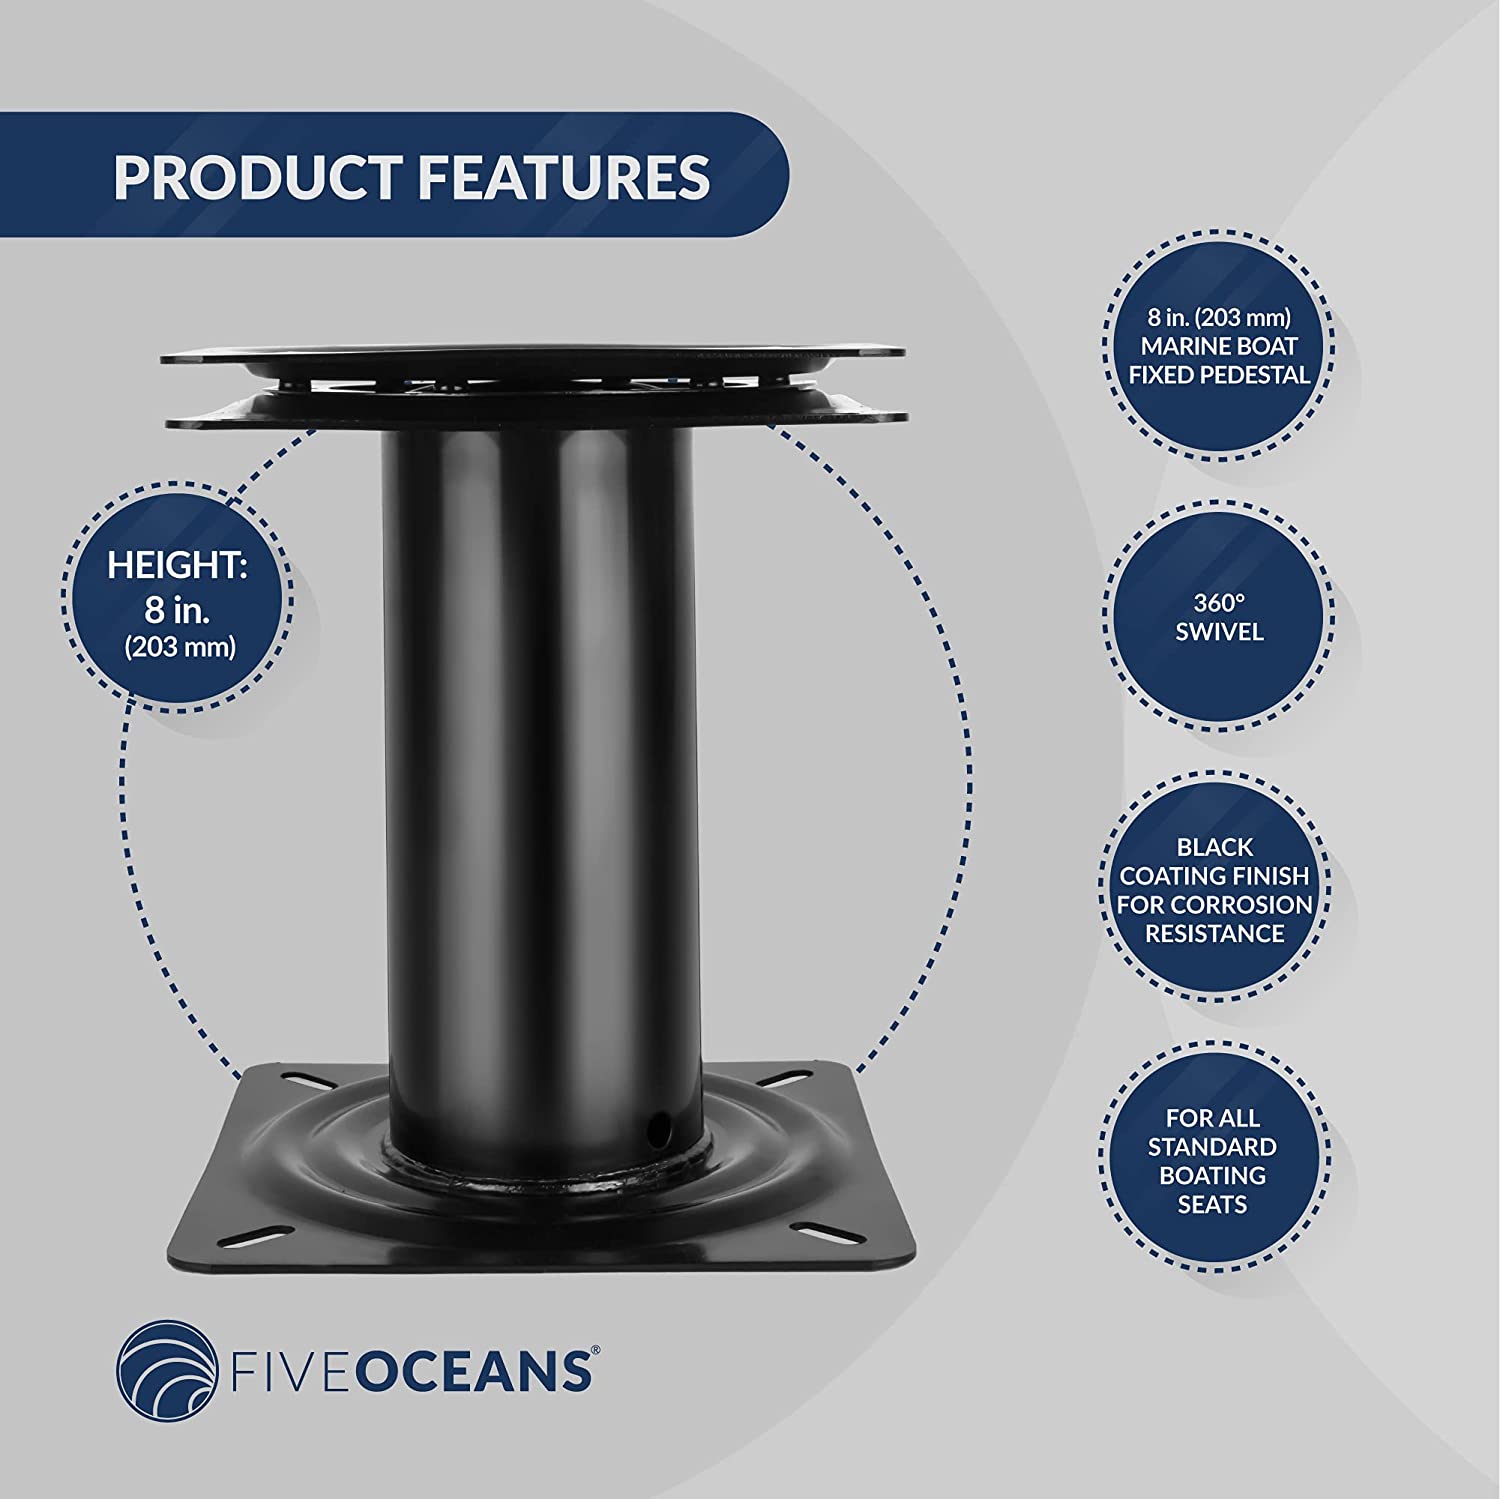 8 in (203mm) Marine Boat Seat Fixed Pedestal with 360 Degree